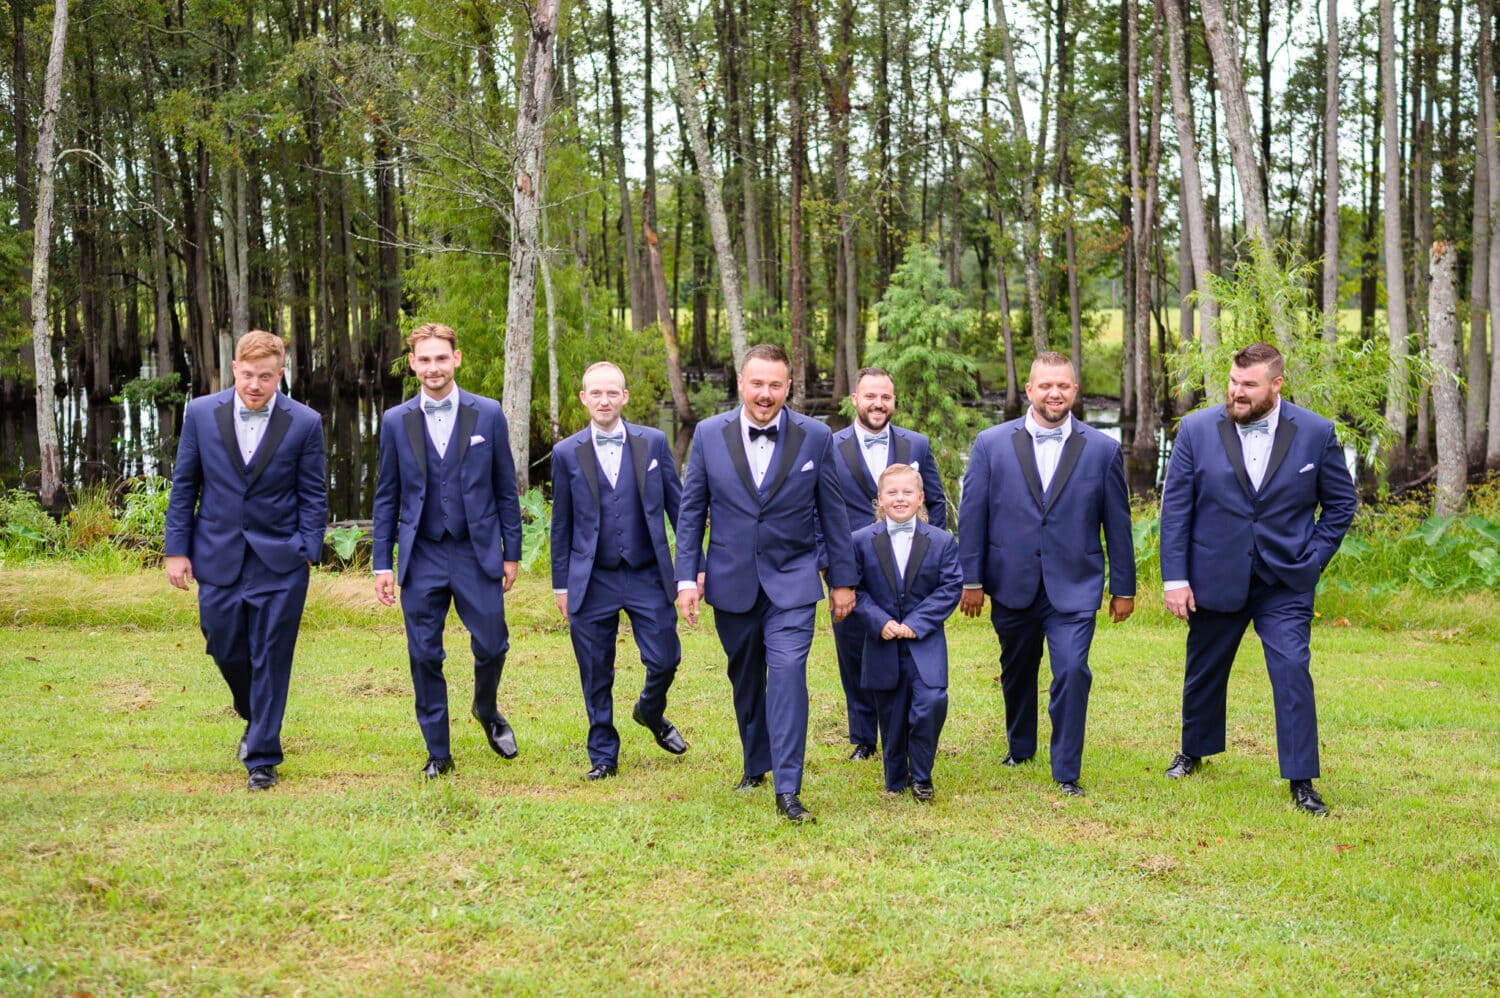 Groomsmen walking together from the marsh - Wildhorse at Parker Farms